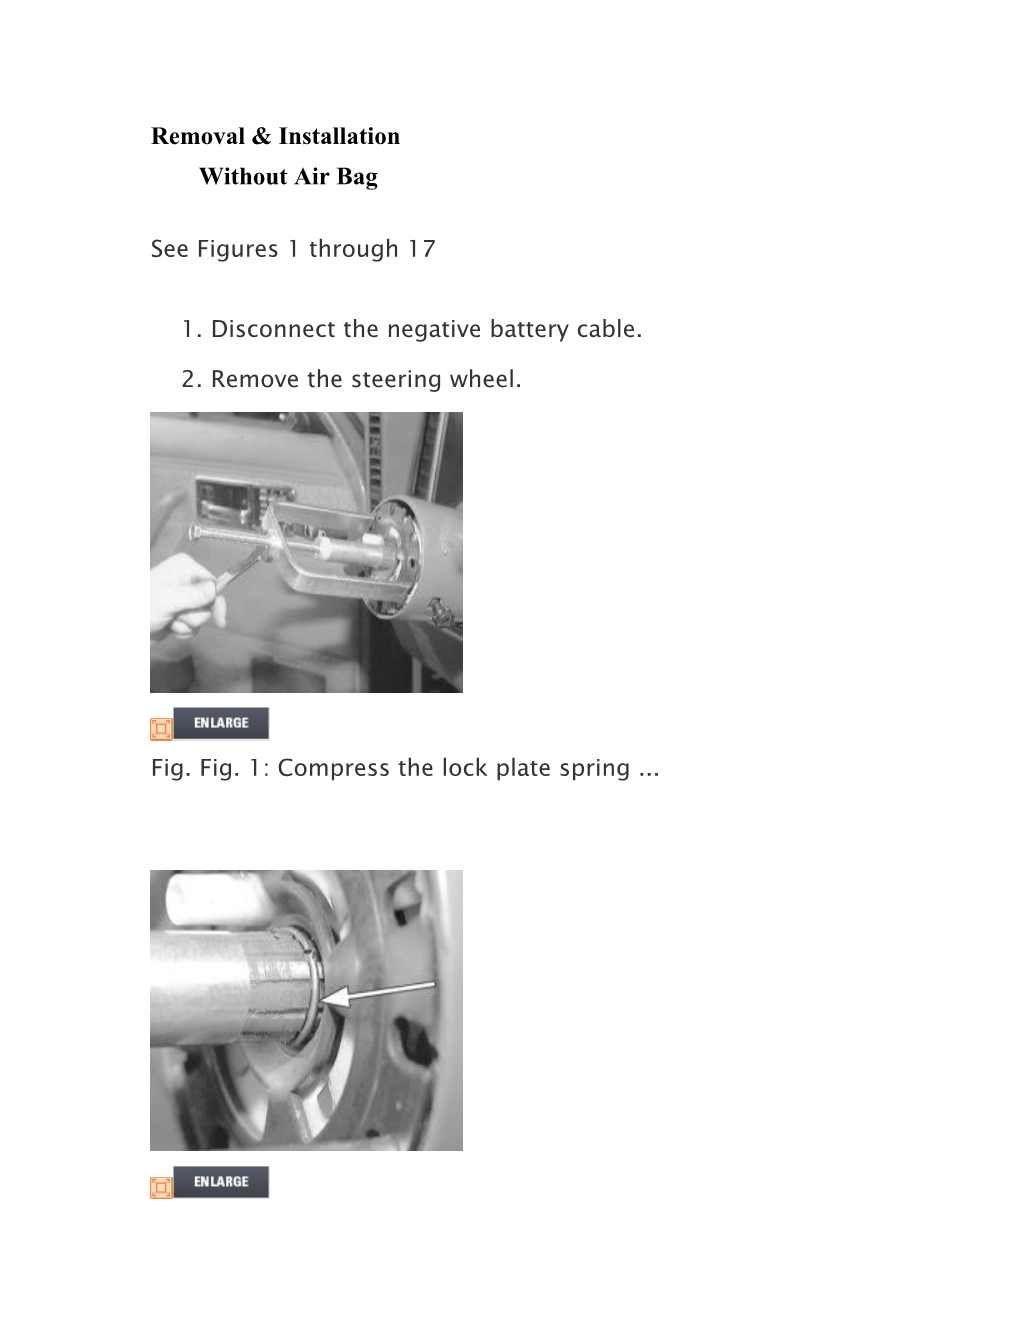 Removal & Installationwithout Air Bag